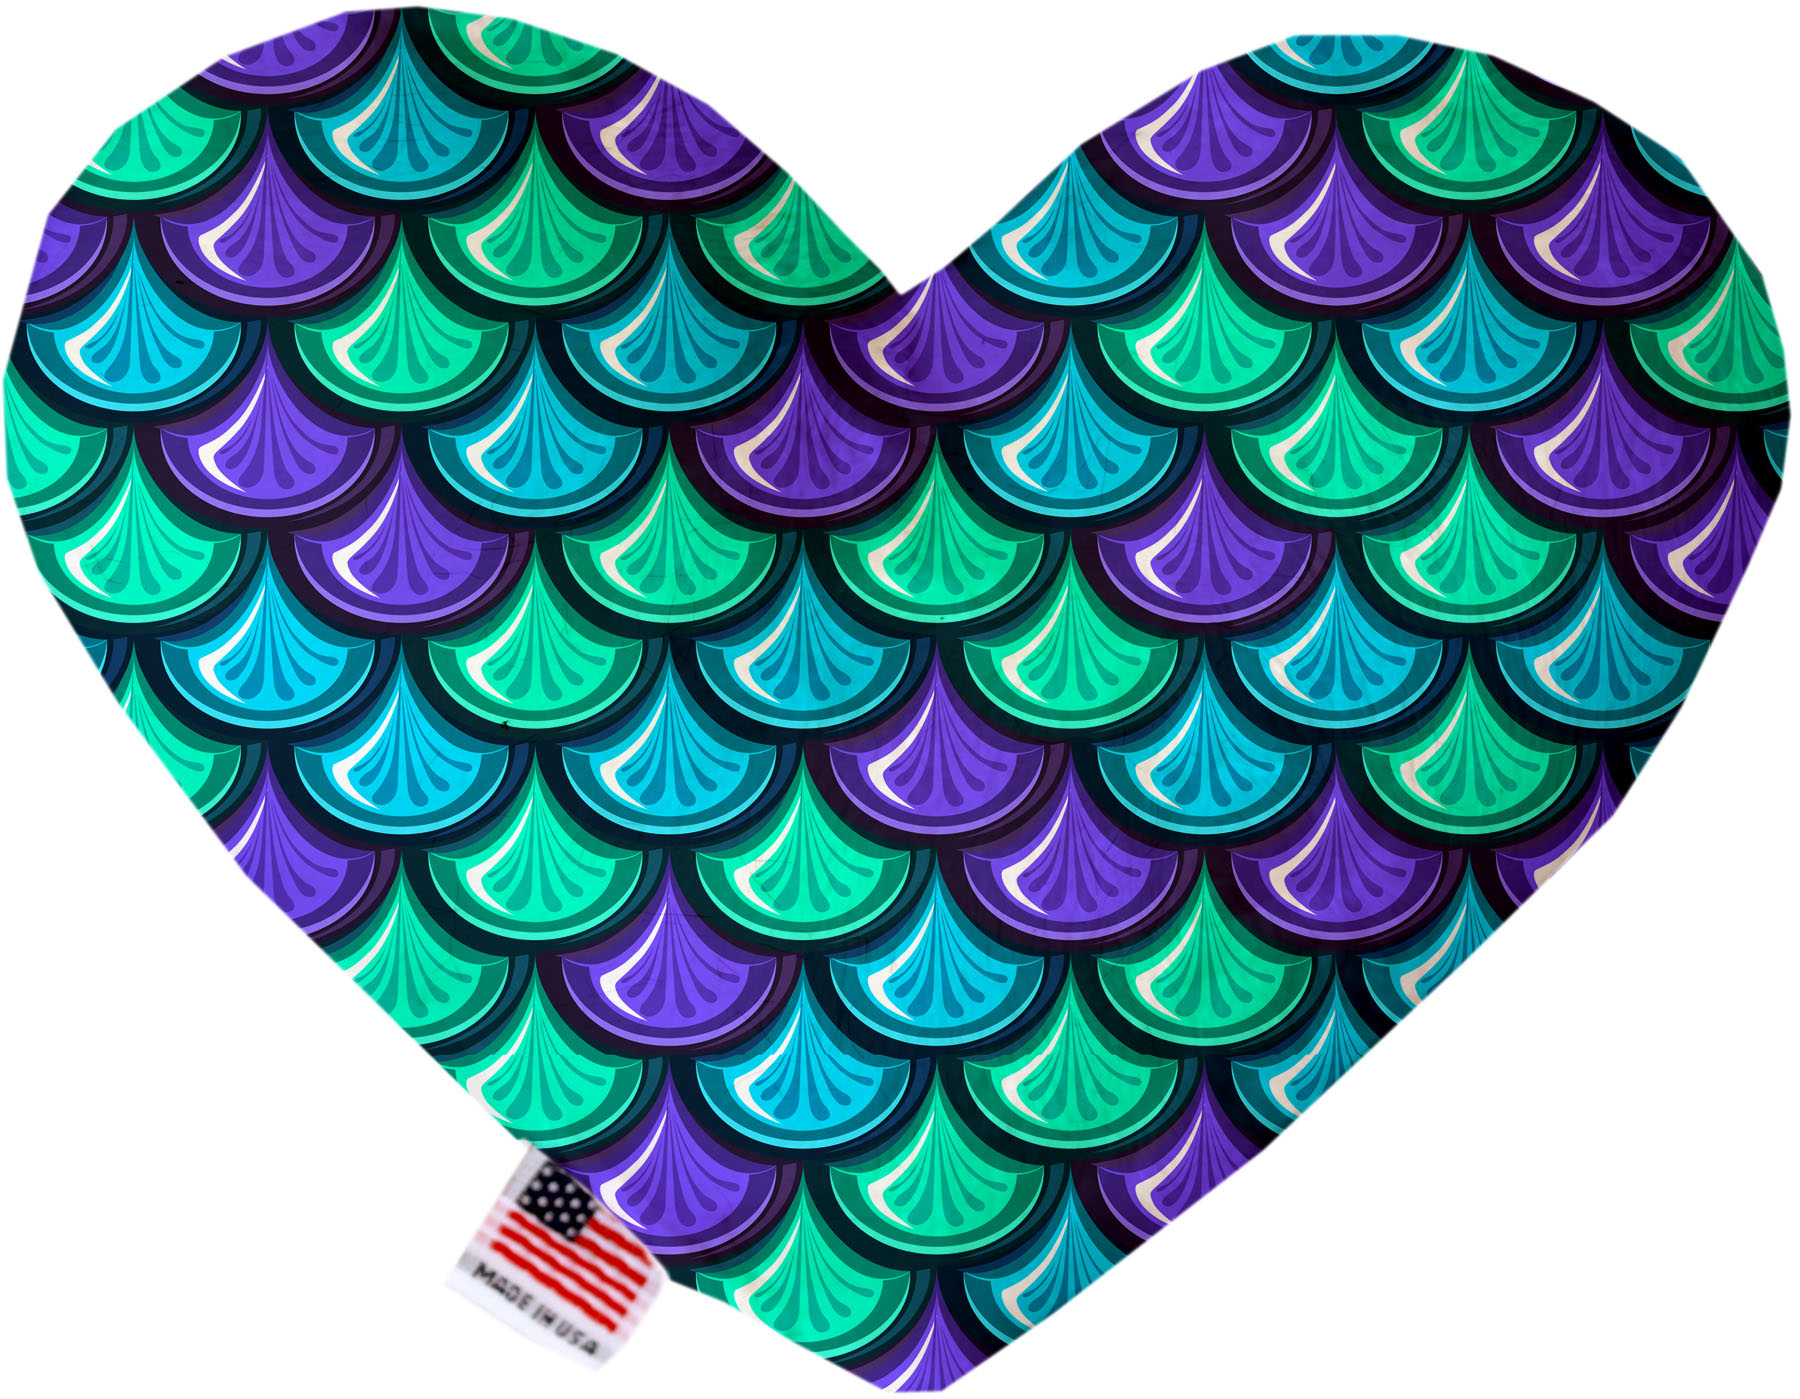 Mermaid Scales 6 inch Heart Dog Toy